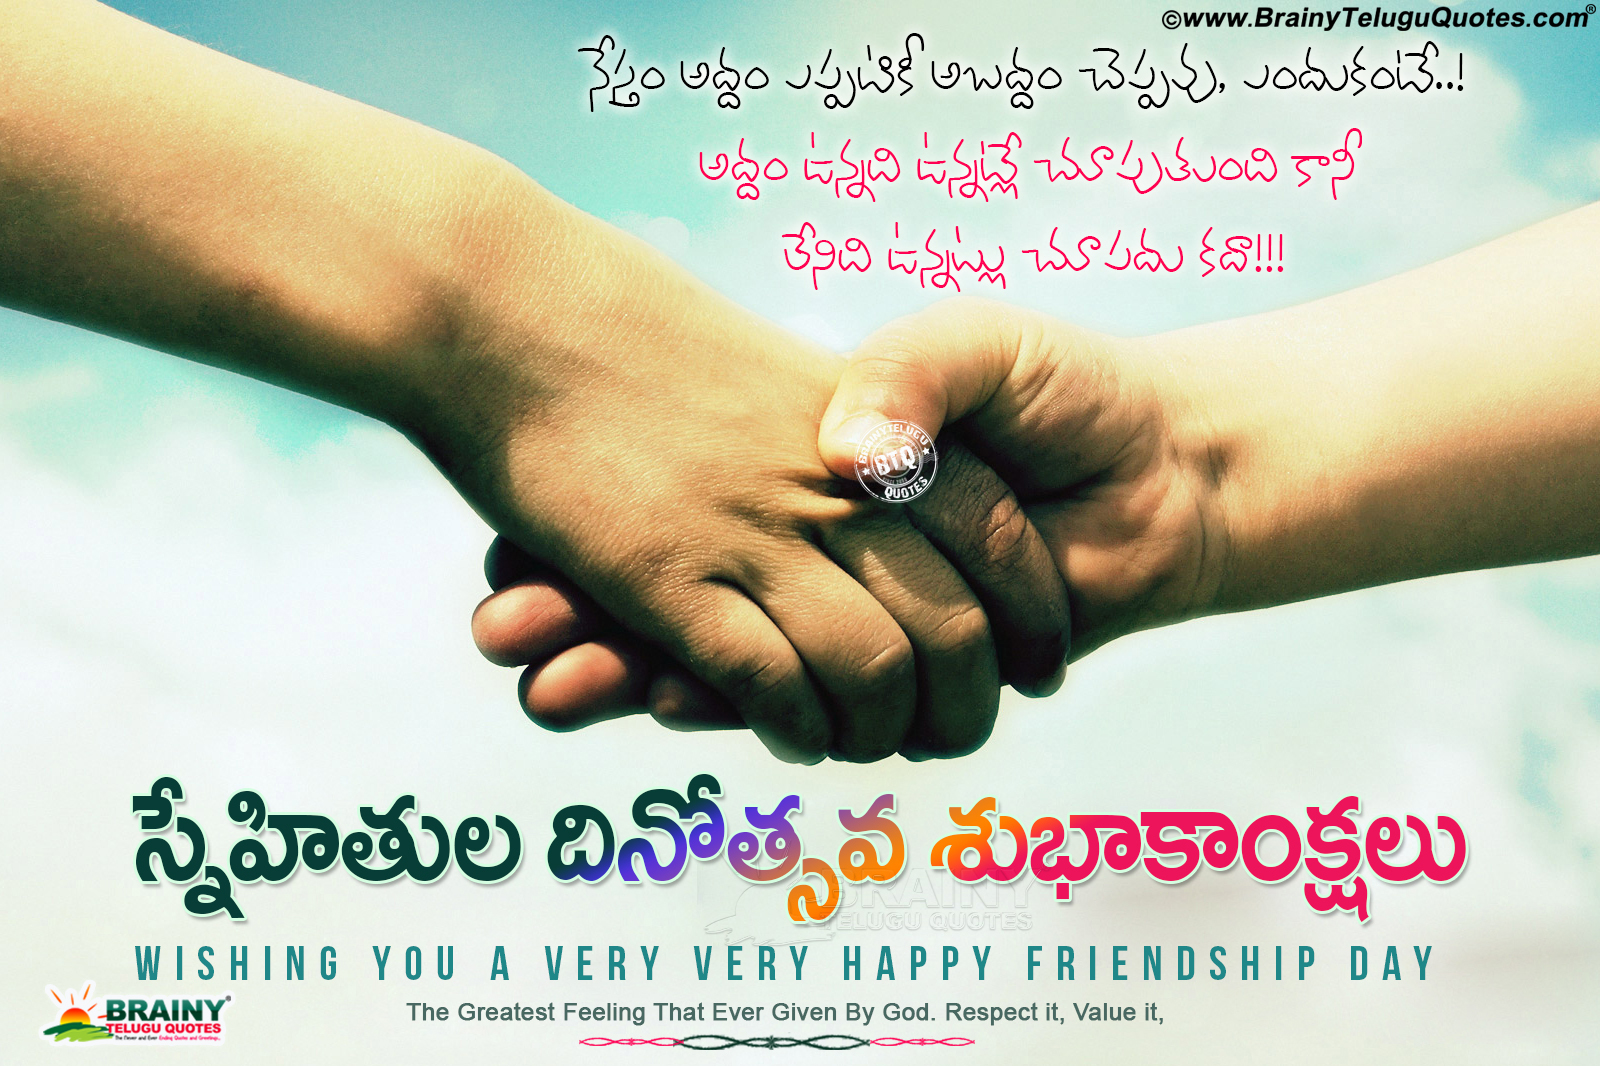 Best Trending Whats App Sharing Friendship Day Greetings Quotes in